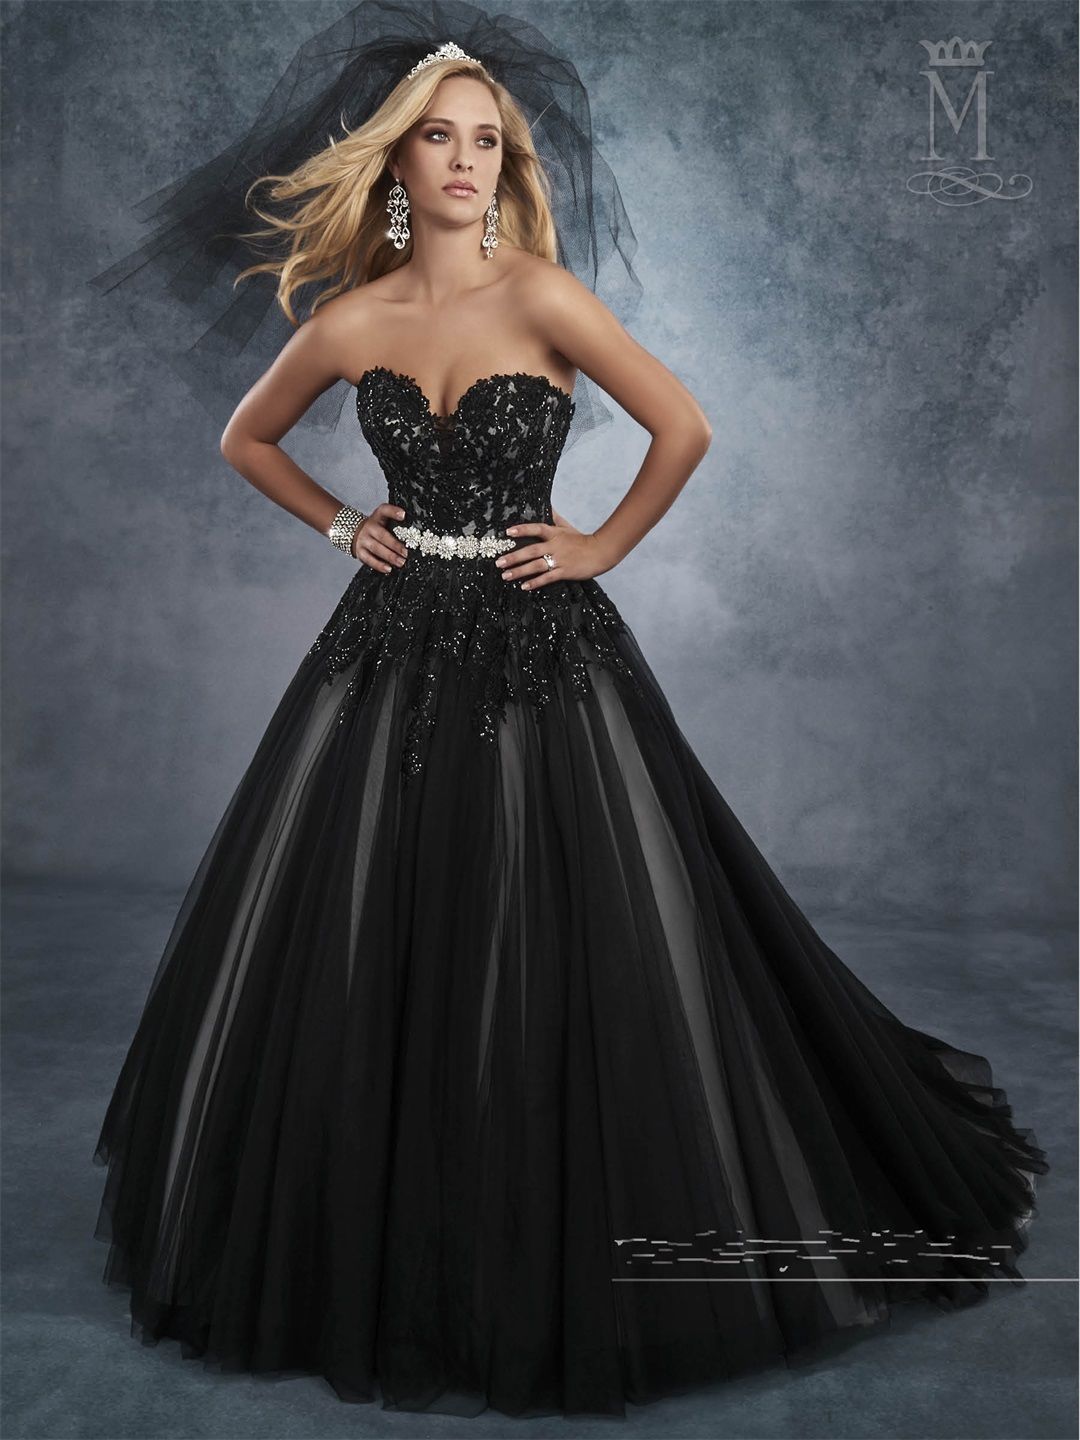 Black Wedding Dresses 2017 With Free Veil And Crystals Sash Appliques ...